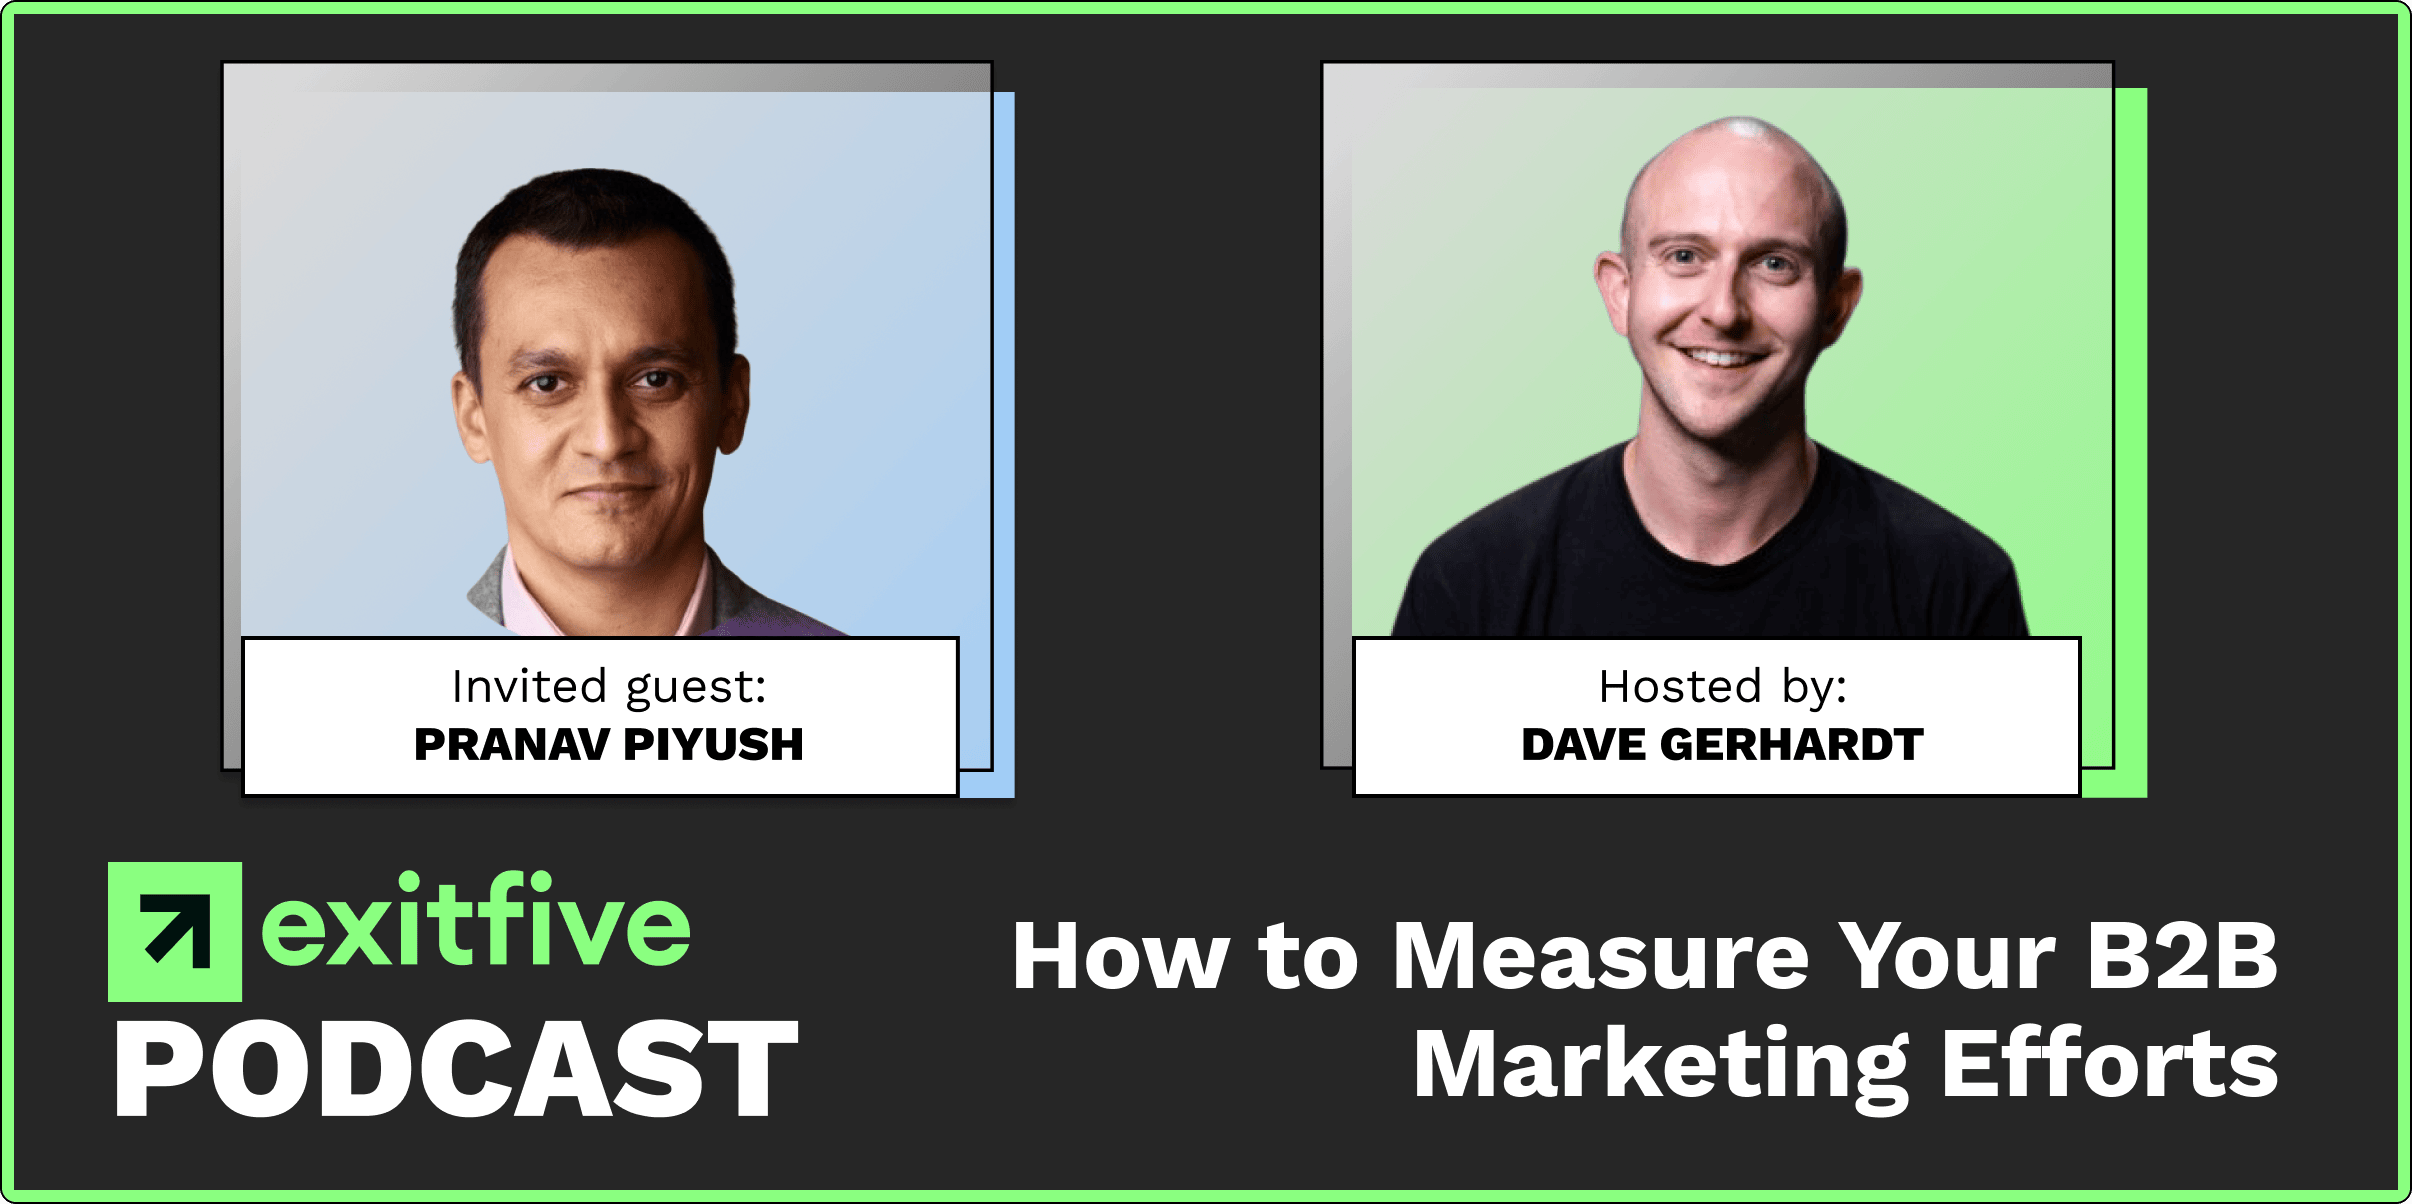 Strategy | How to Measure Your B2B Marketing Efforts (With Pranav Piyush, CEO and Co-Founder of Paramark)